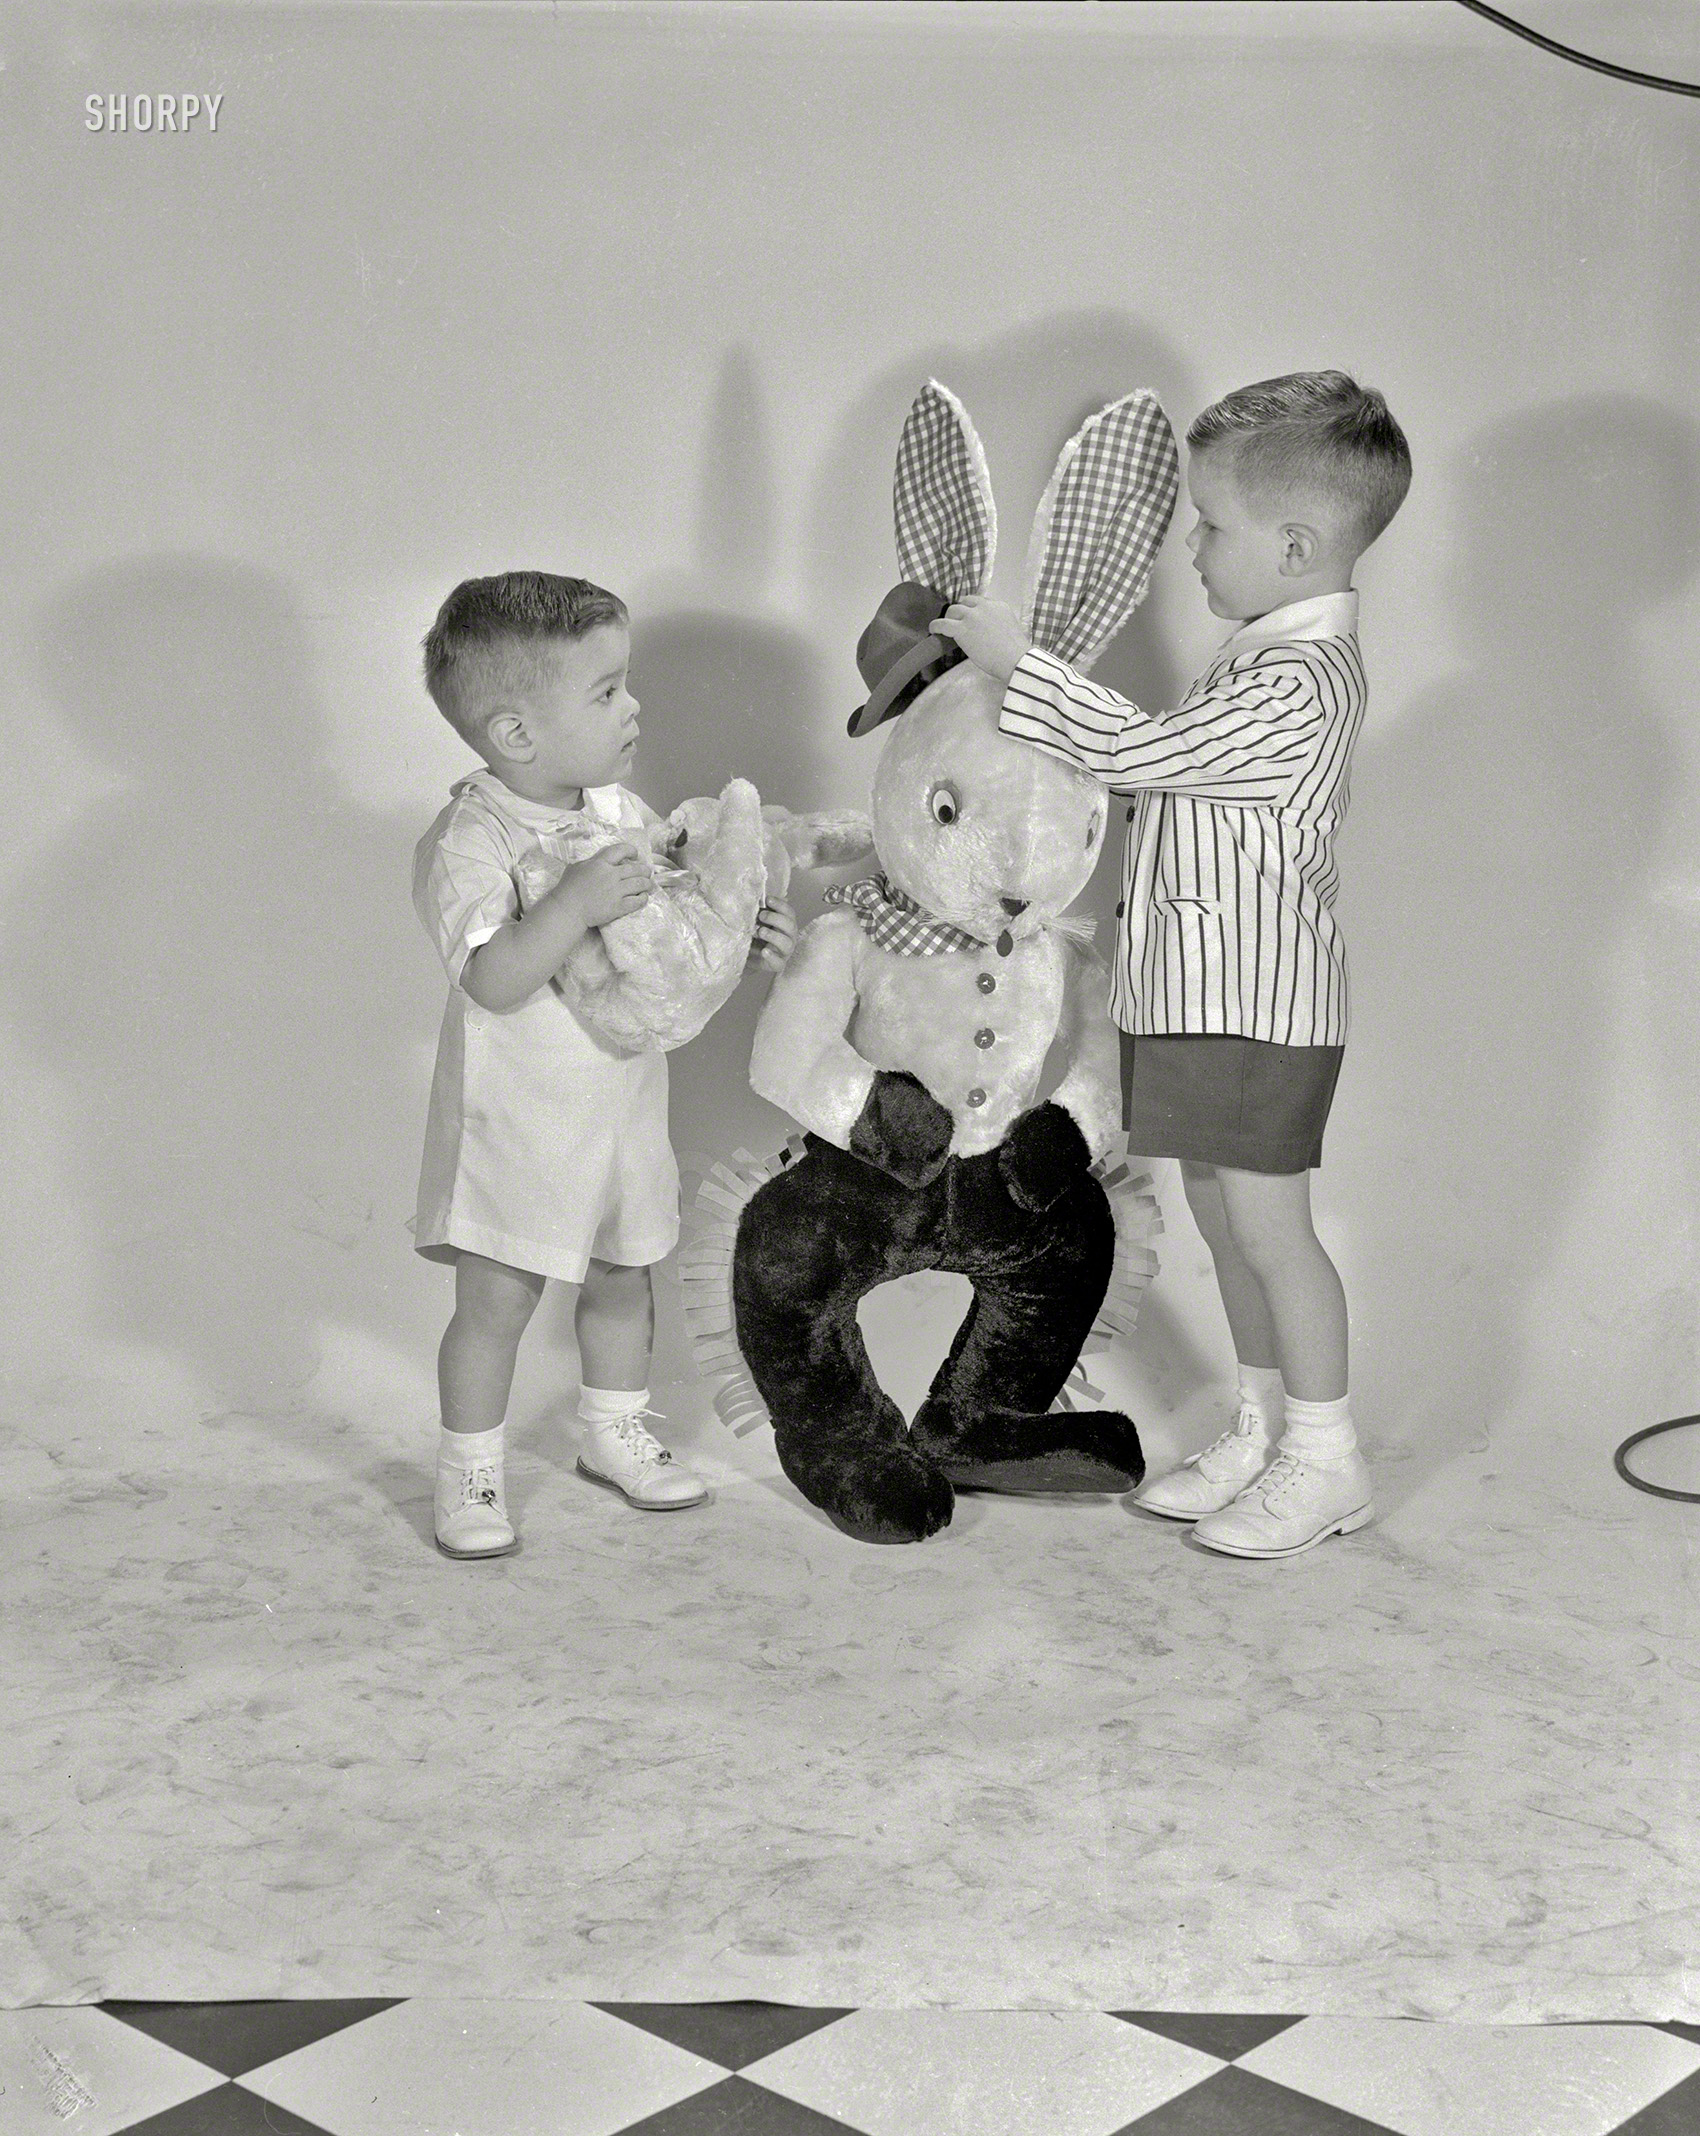 Columbus, Georgia, circa 1957. "Boys with Cowboy Easter Bunny." 4x5 acetate negative from the Shorpy News Photo Archive. View full size.